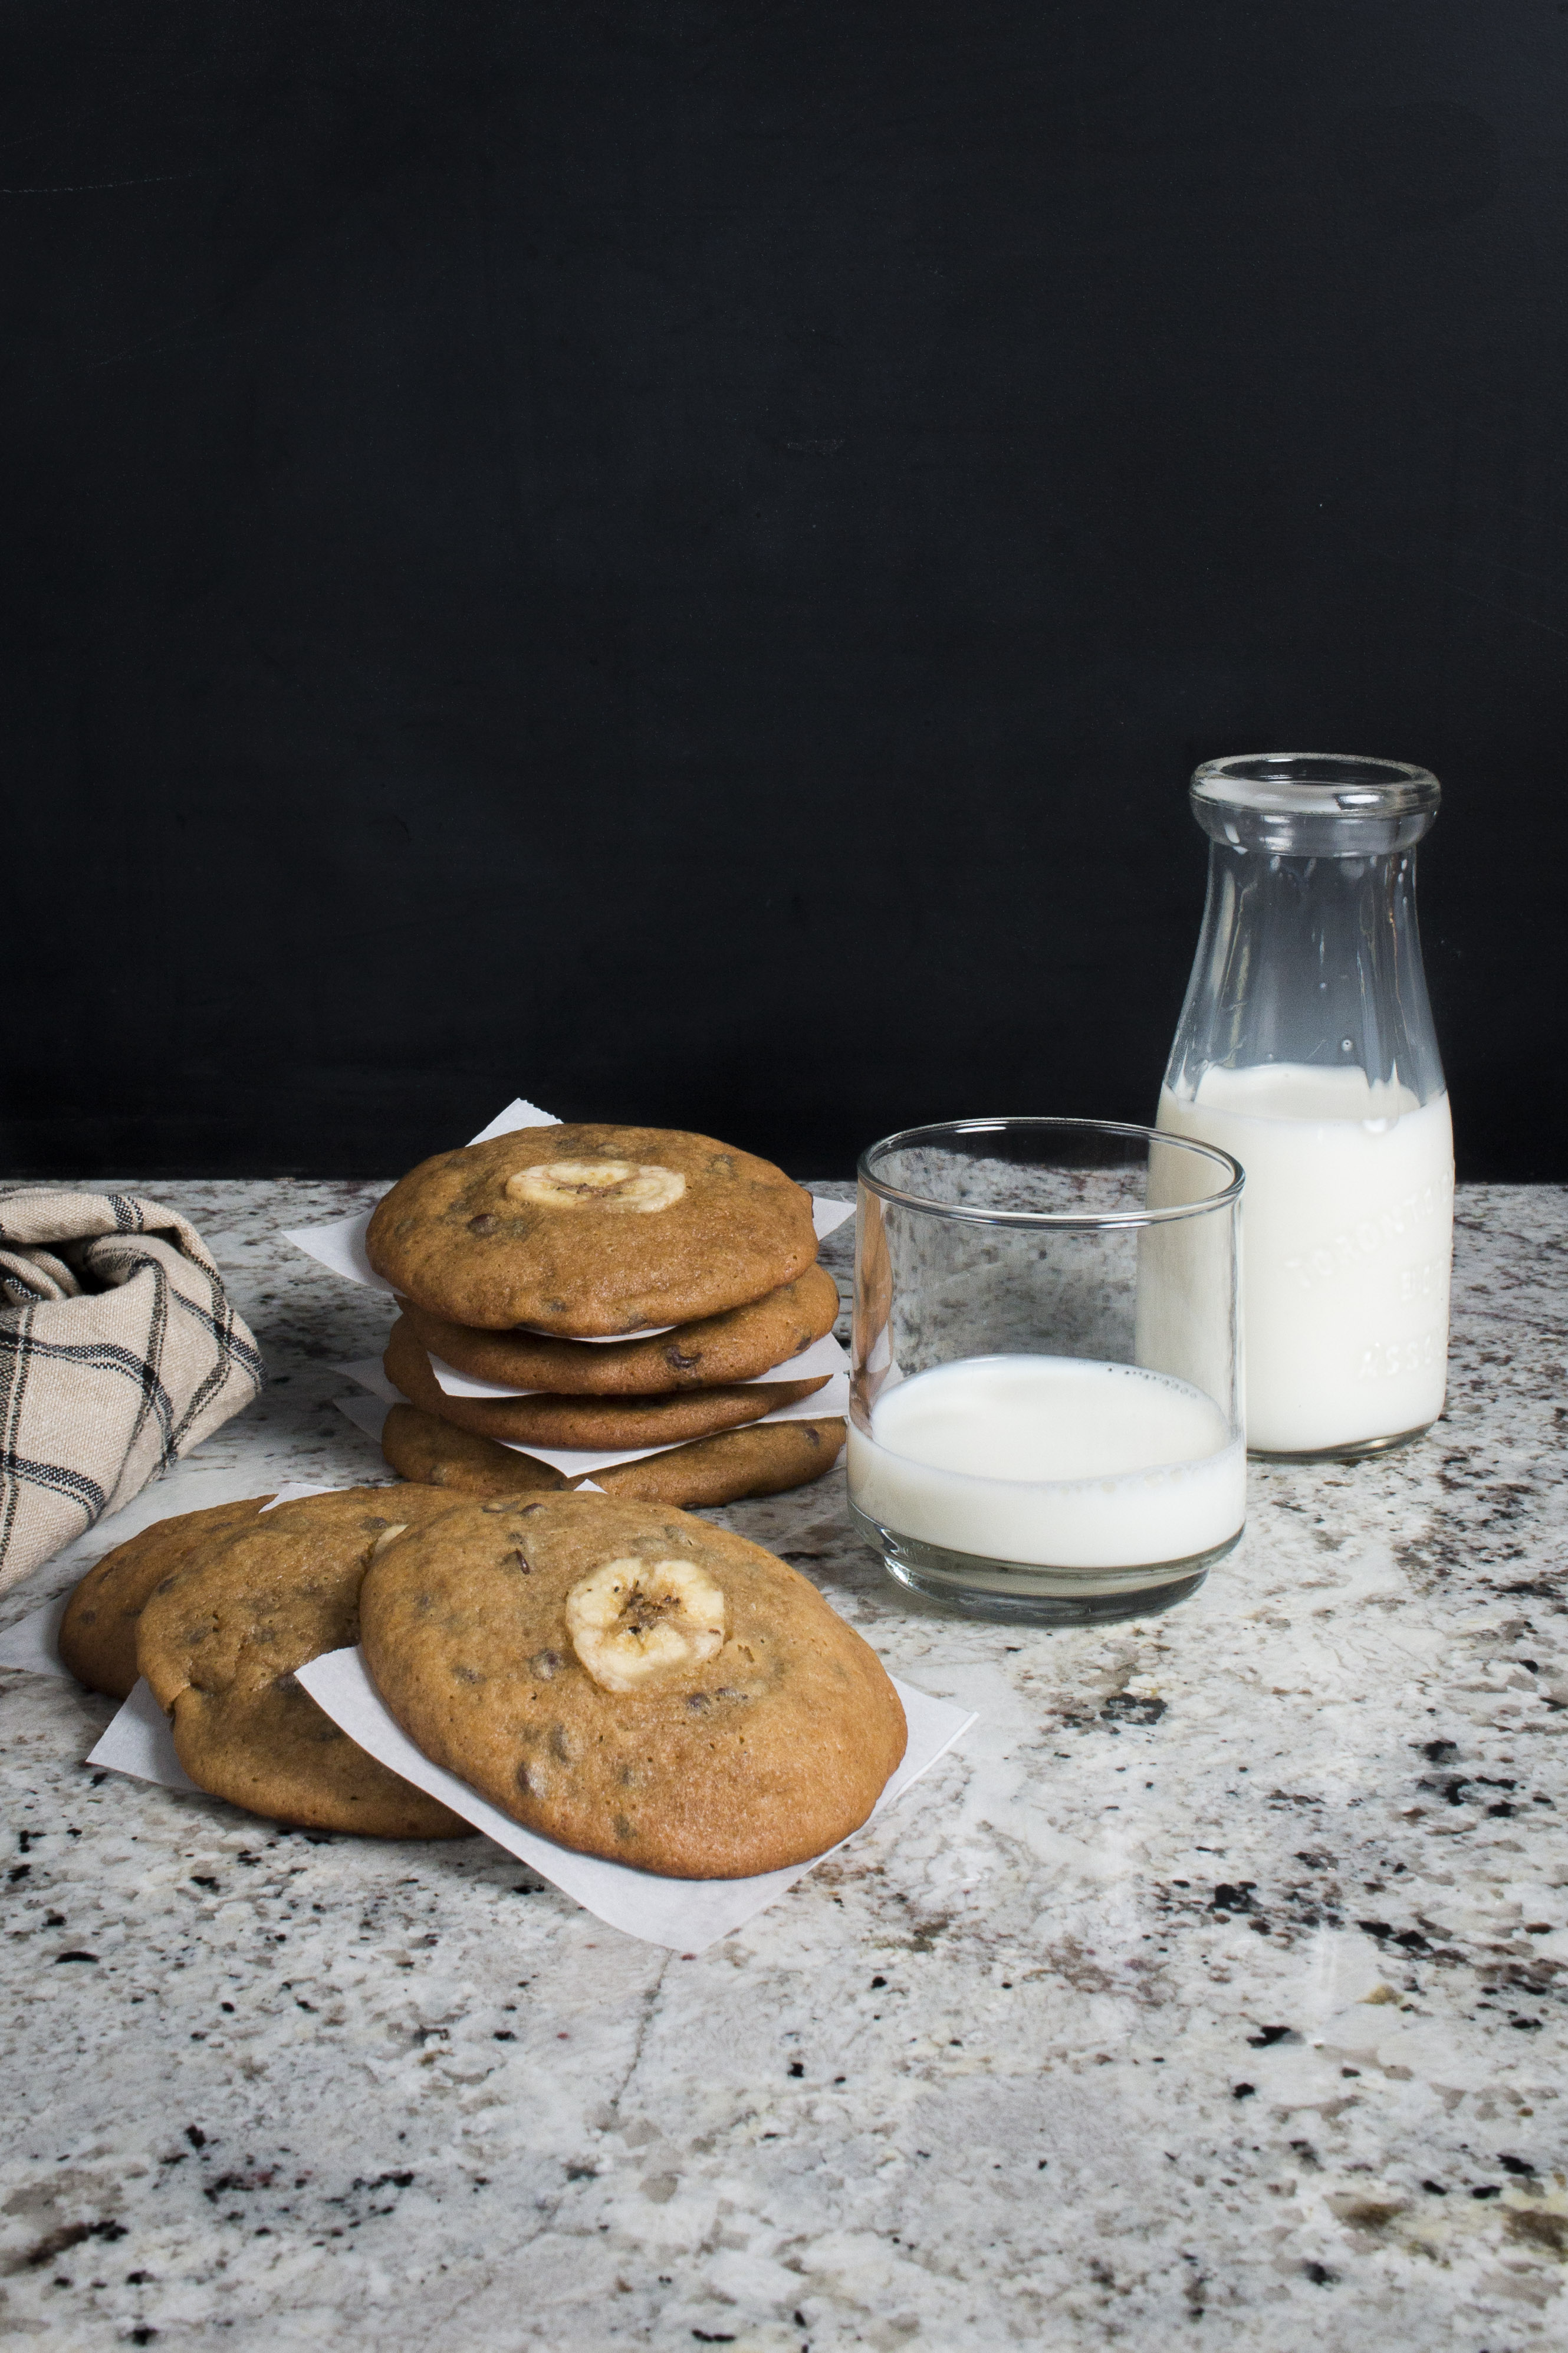 Banana Chocolate Chip Cookies from my beloved Moo Milk Bar |I Will Not Eat Oysters